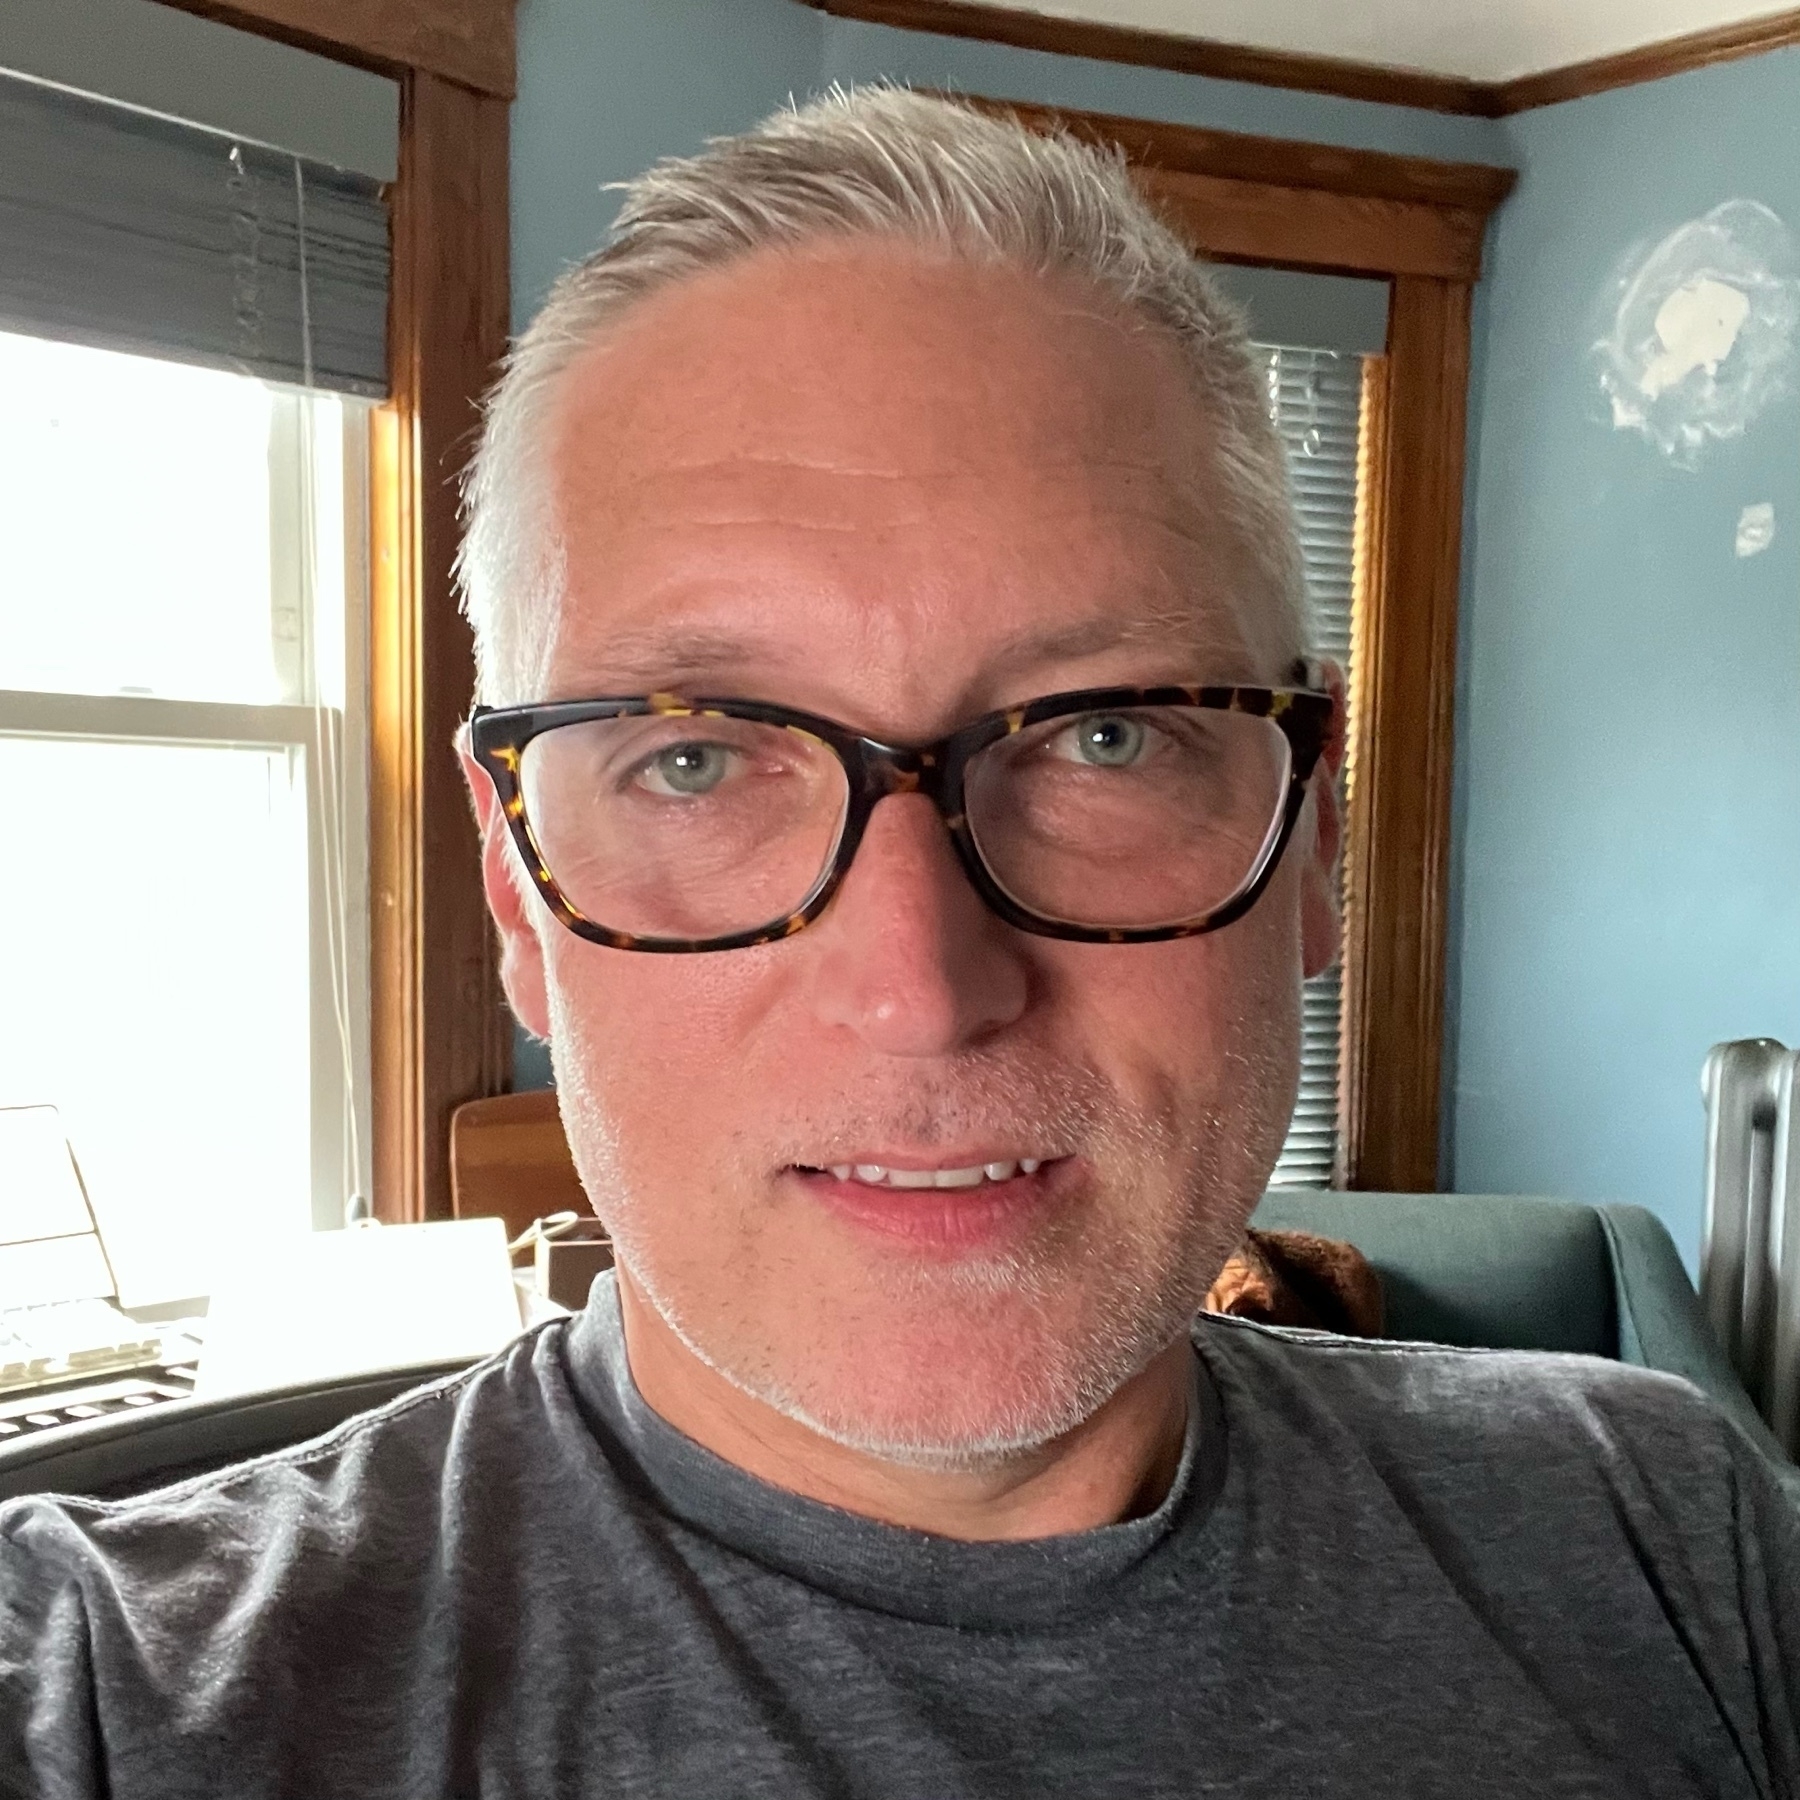 caucasian man with grey hair and glasses in a casual T-shirt